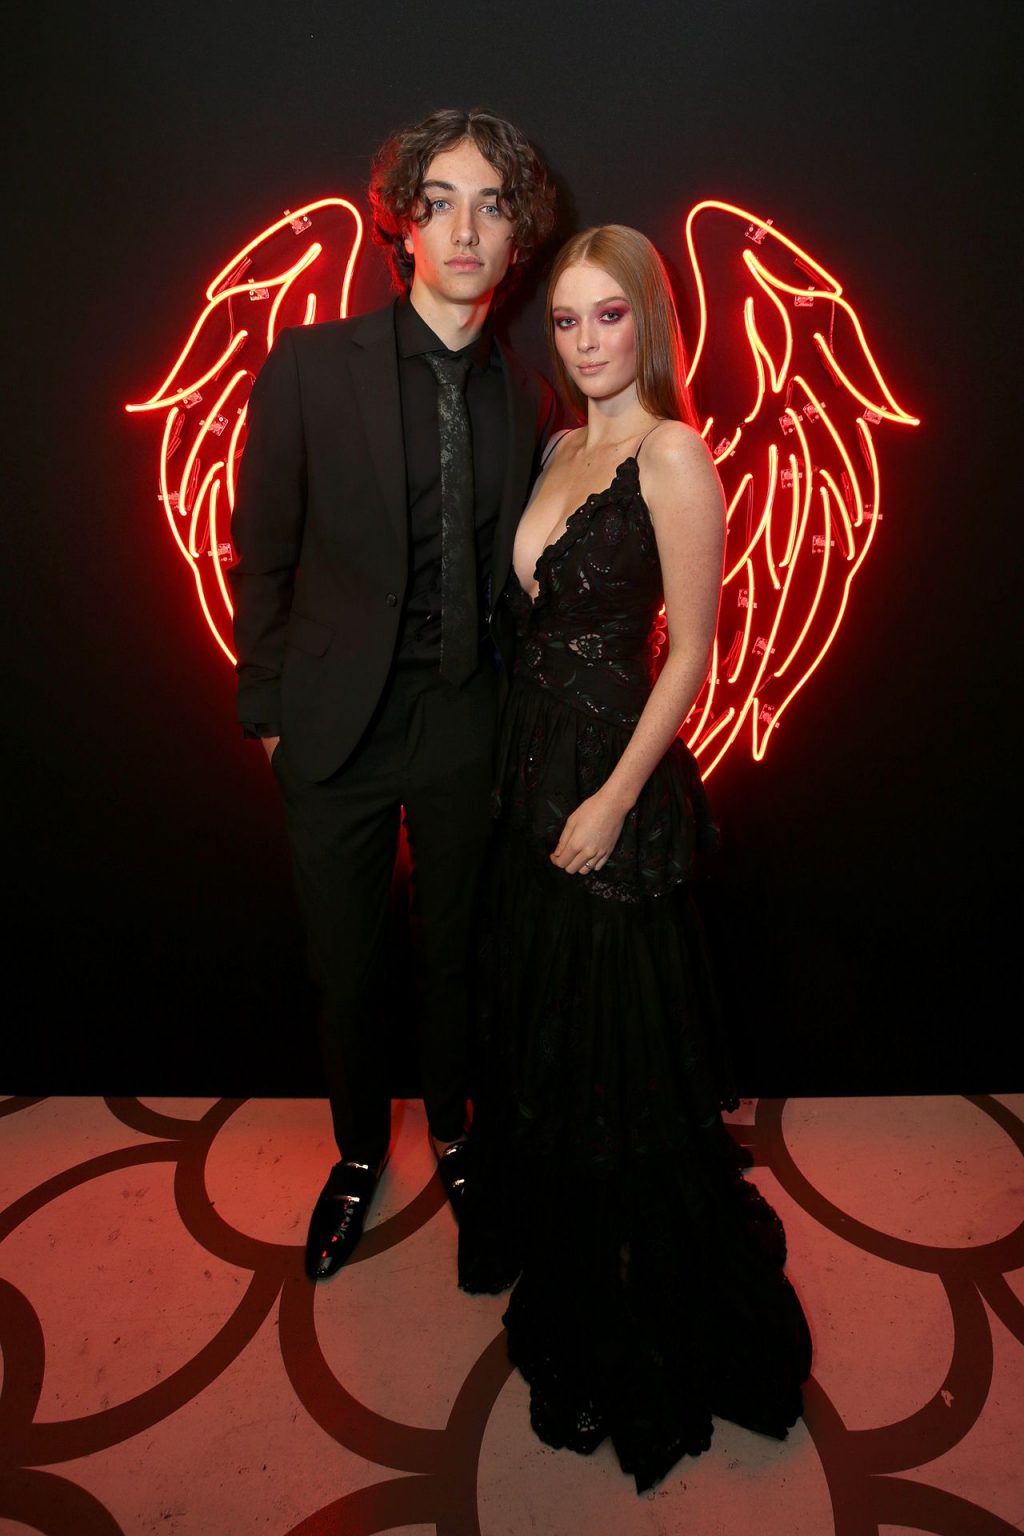 Larsen Thompson’s Cleavage at The Art of Elysium’s 13th Annual Black Tie Artistic Experience ‘Heaven’ (21 Photos)